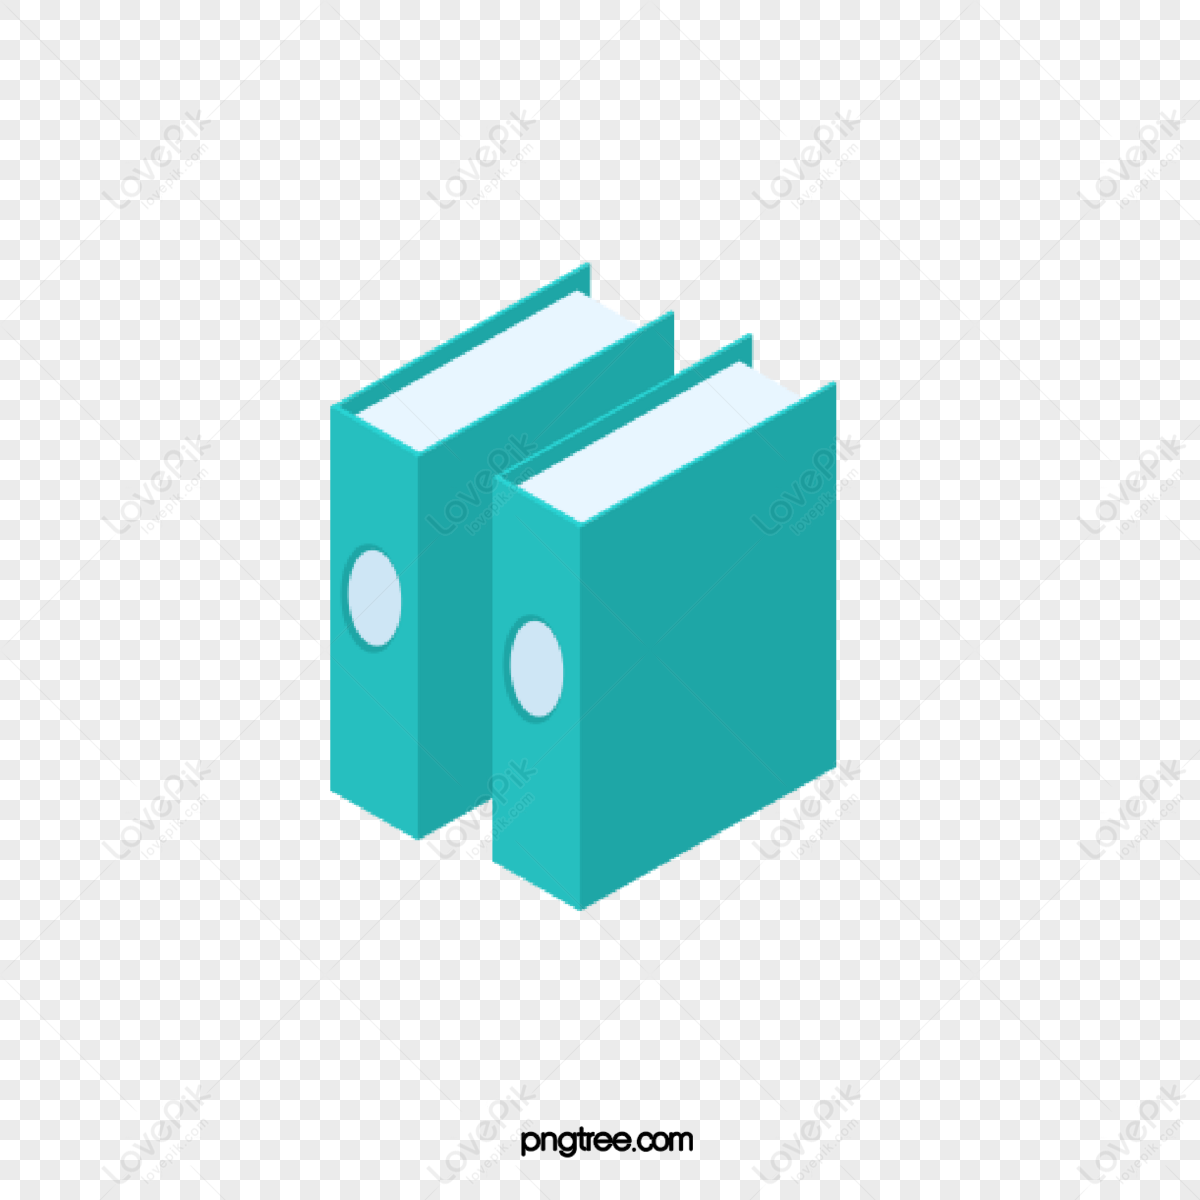 Office stationery books book,stationery cartoon,cartoon stationery,student supplies png transparent image